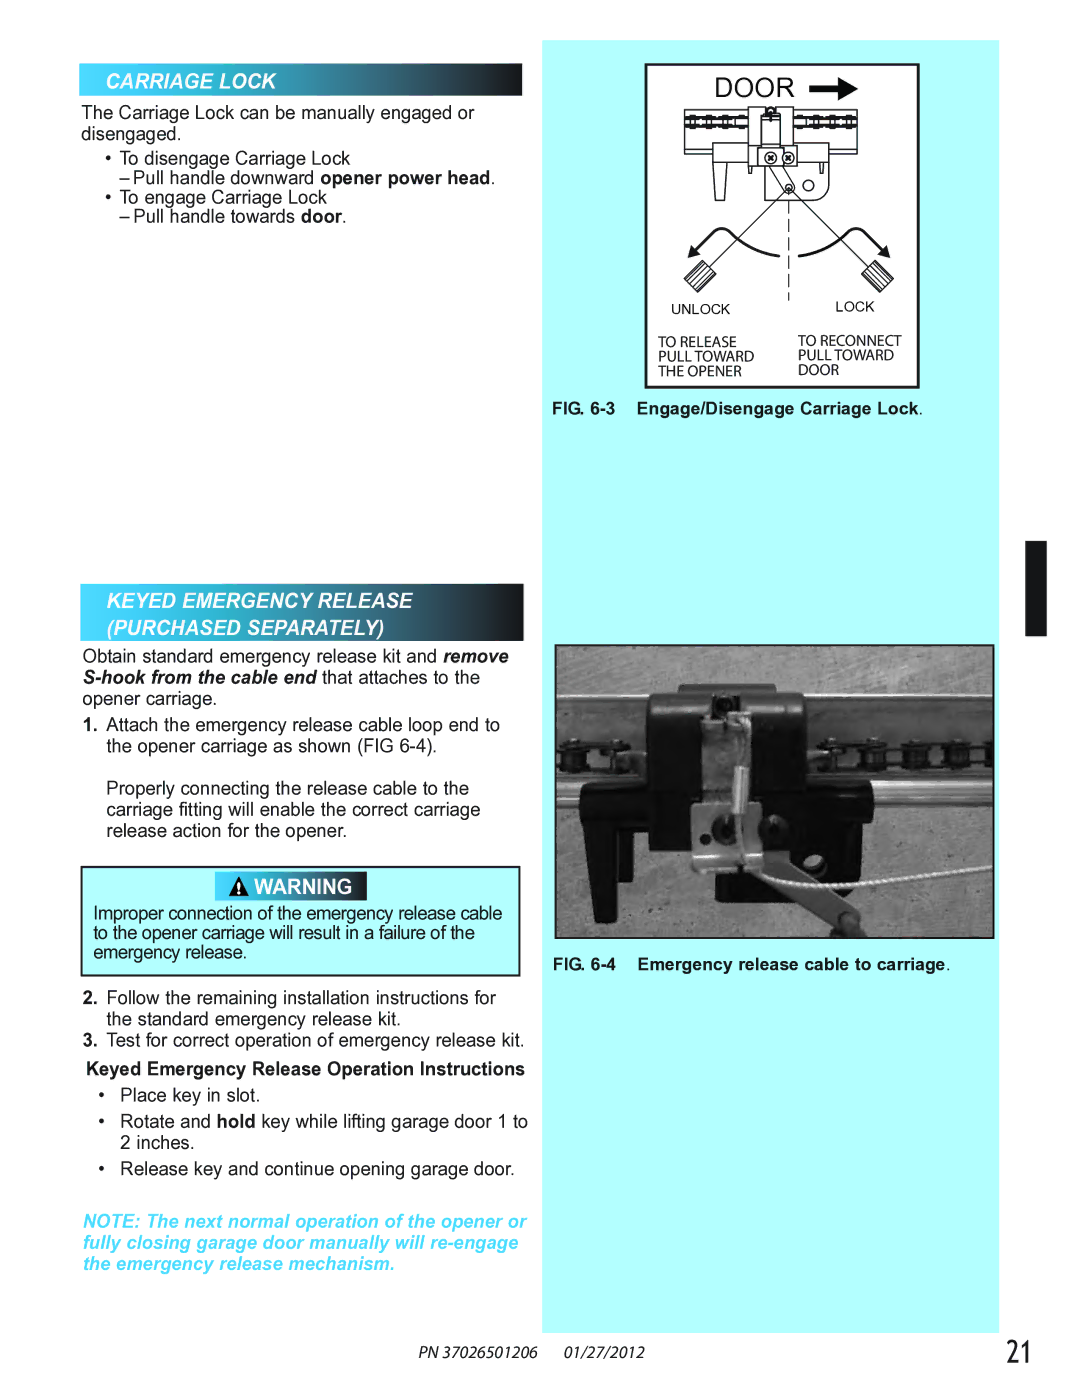 Genie 2042, 2022, 2024 manual Carriage Lock, Keyed Emergency Release Operation Instructions 